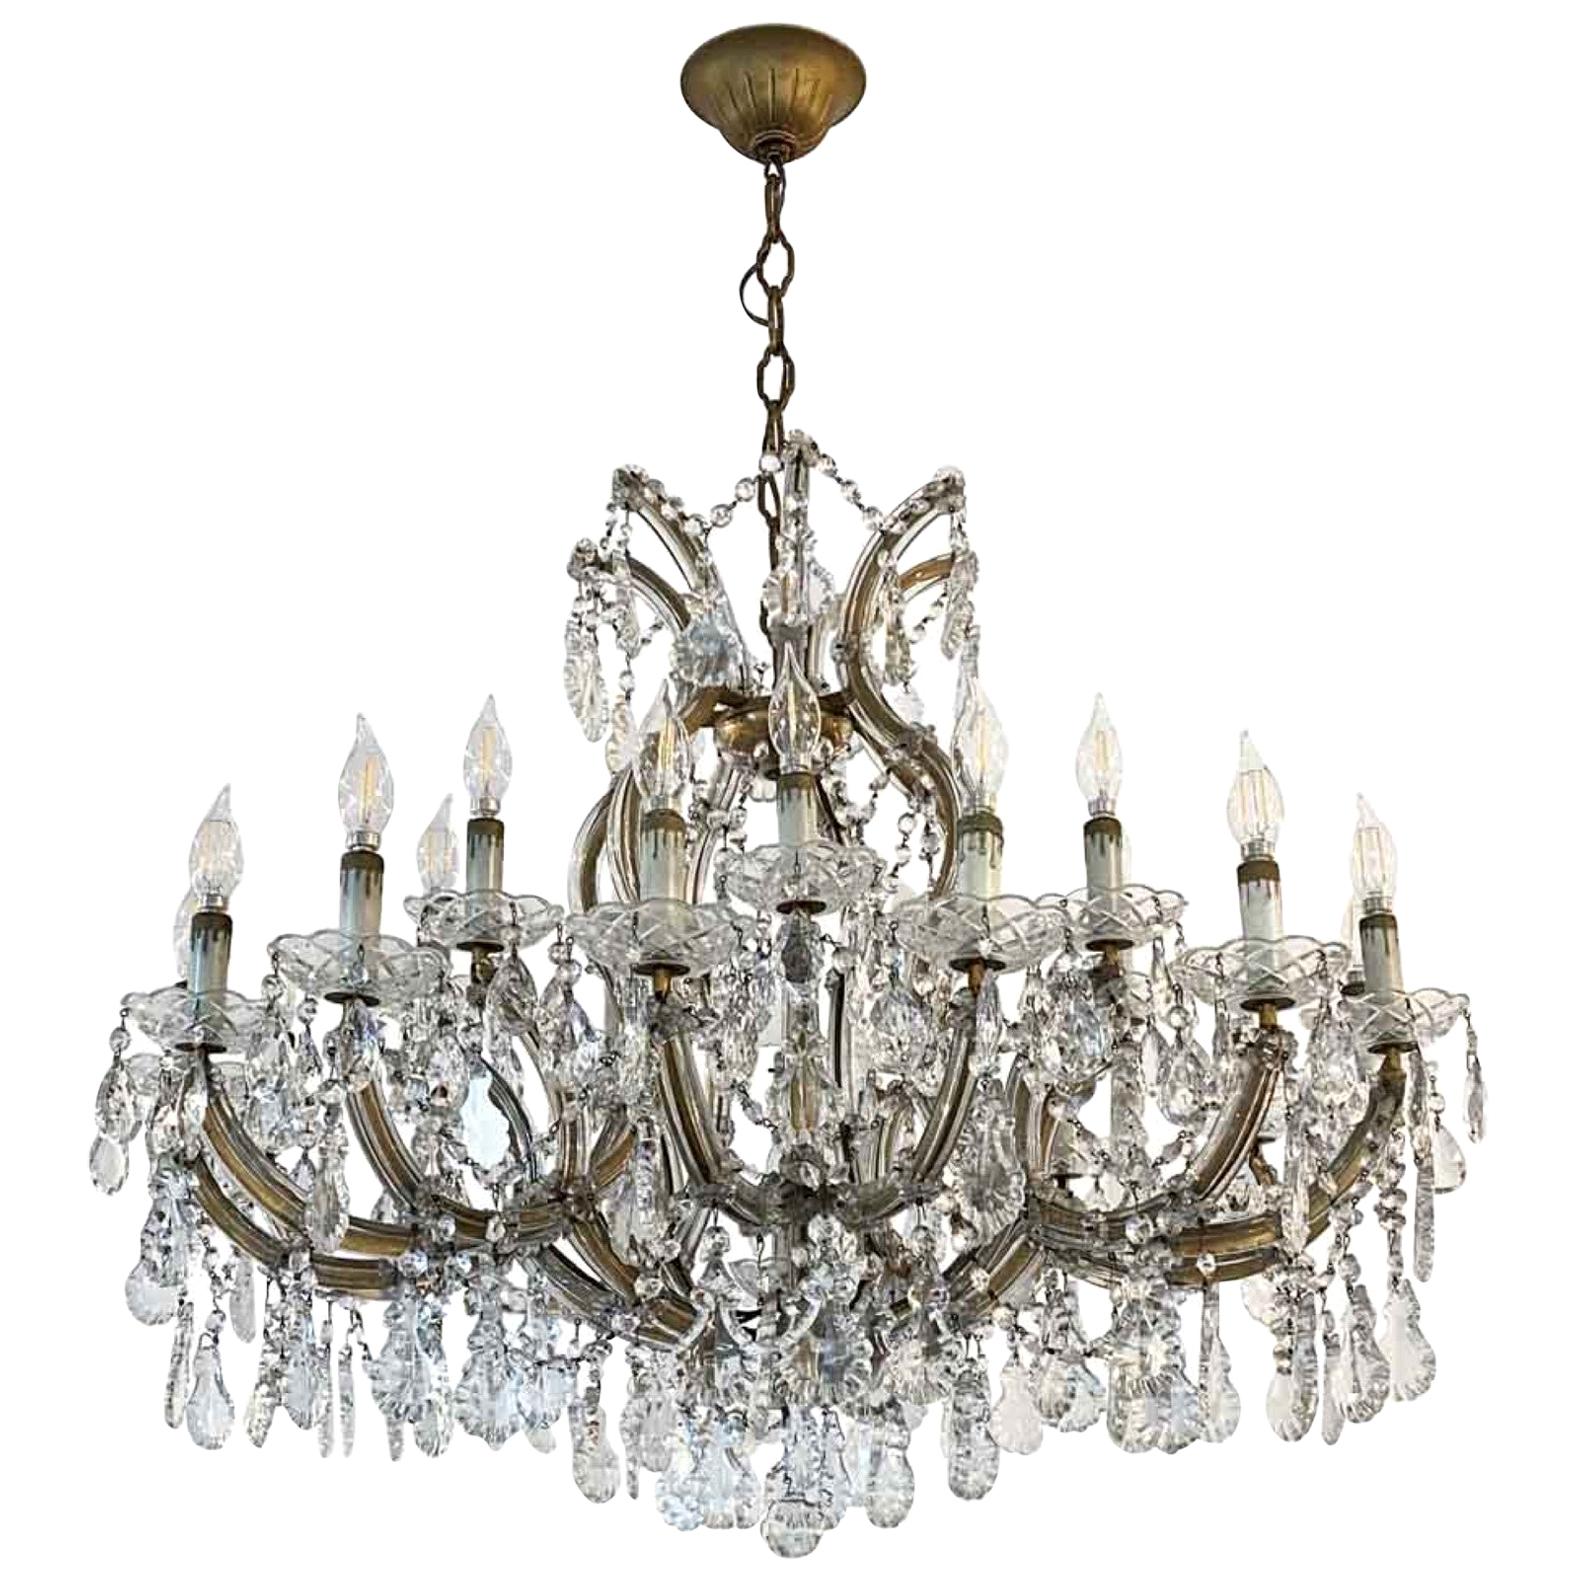 1950s Marie Therese Crystal Chandelier 21 Arms Substantial Size Antique